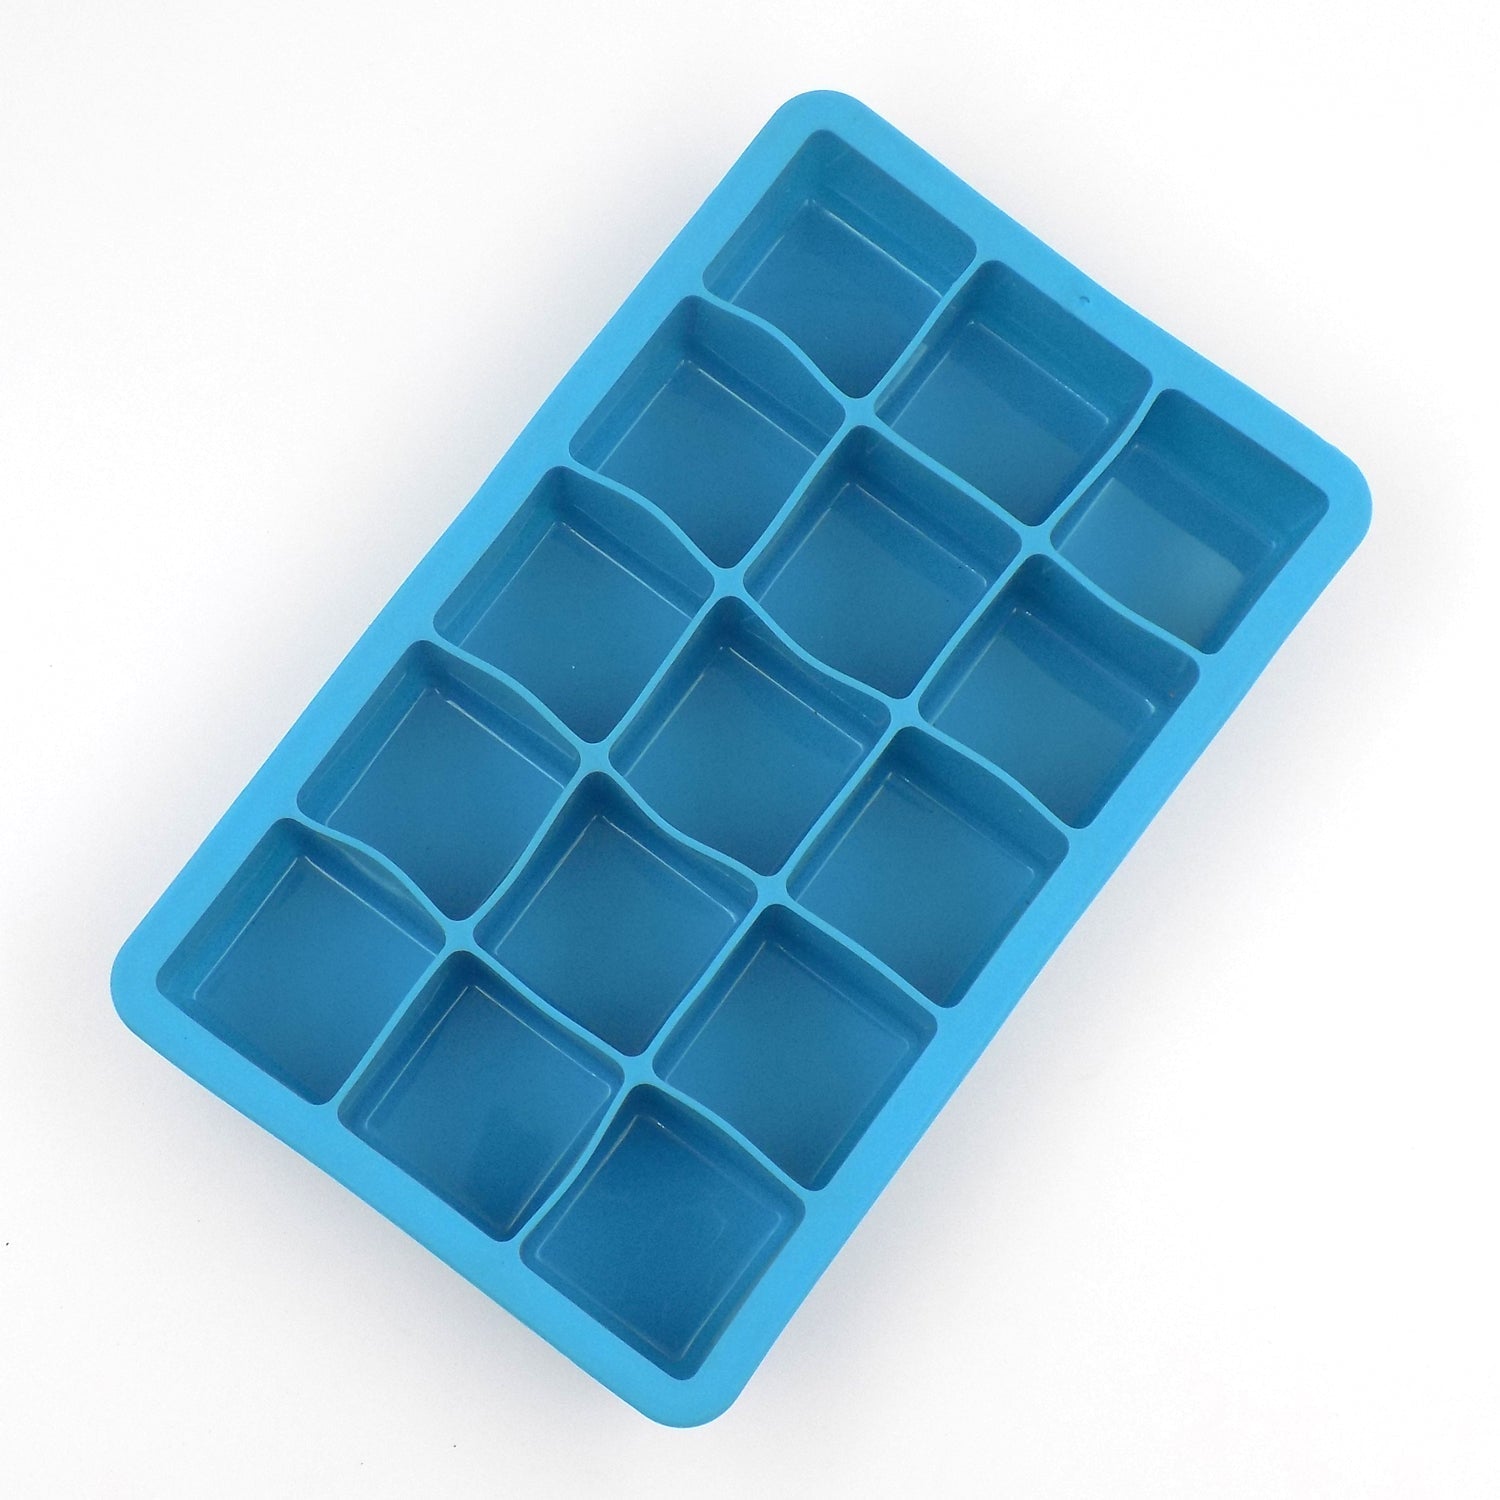 4768 Sili 15 Cavity Ice Tray and cavity ice tool Used for storing and freezing various types of ice cubes.